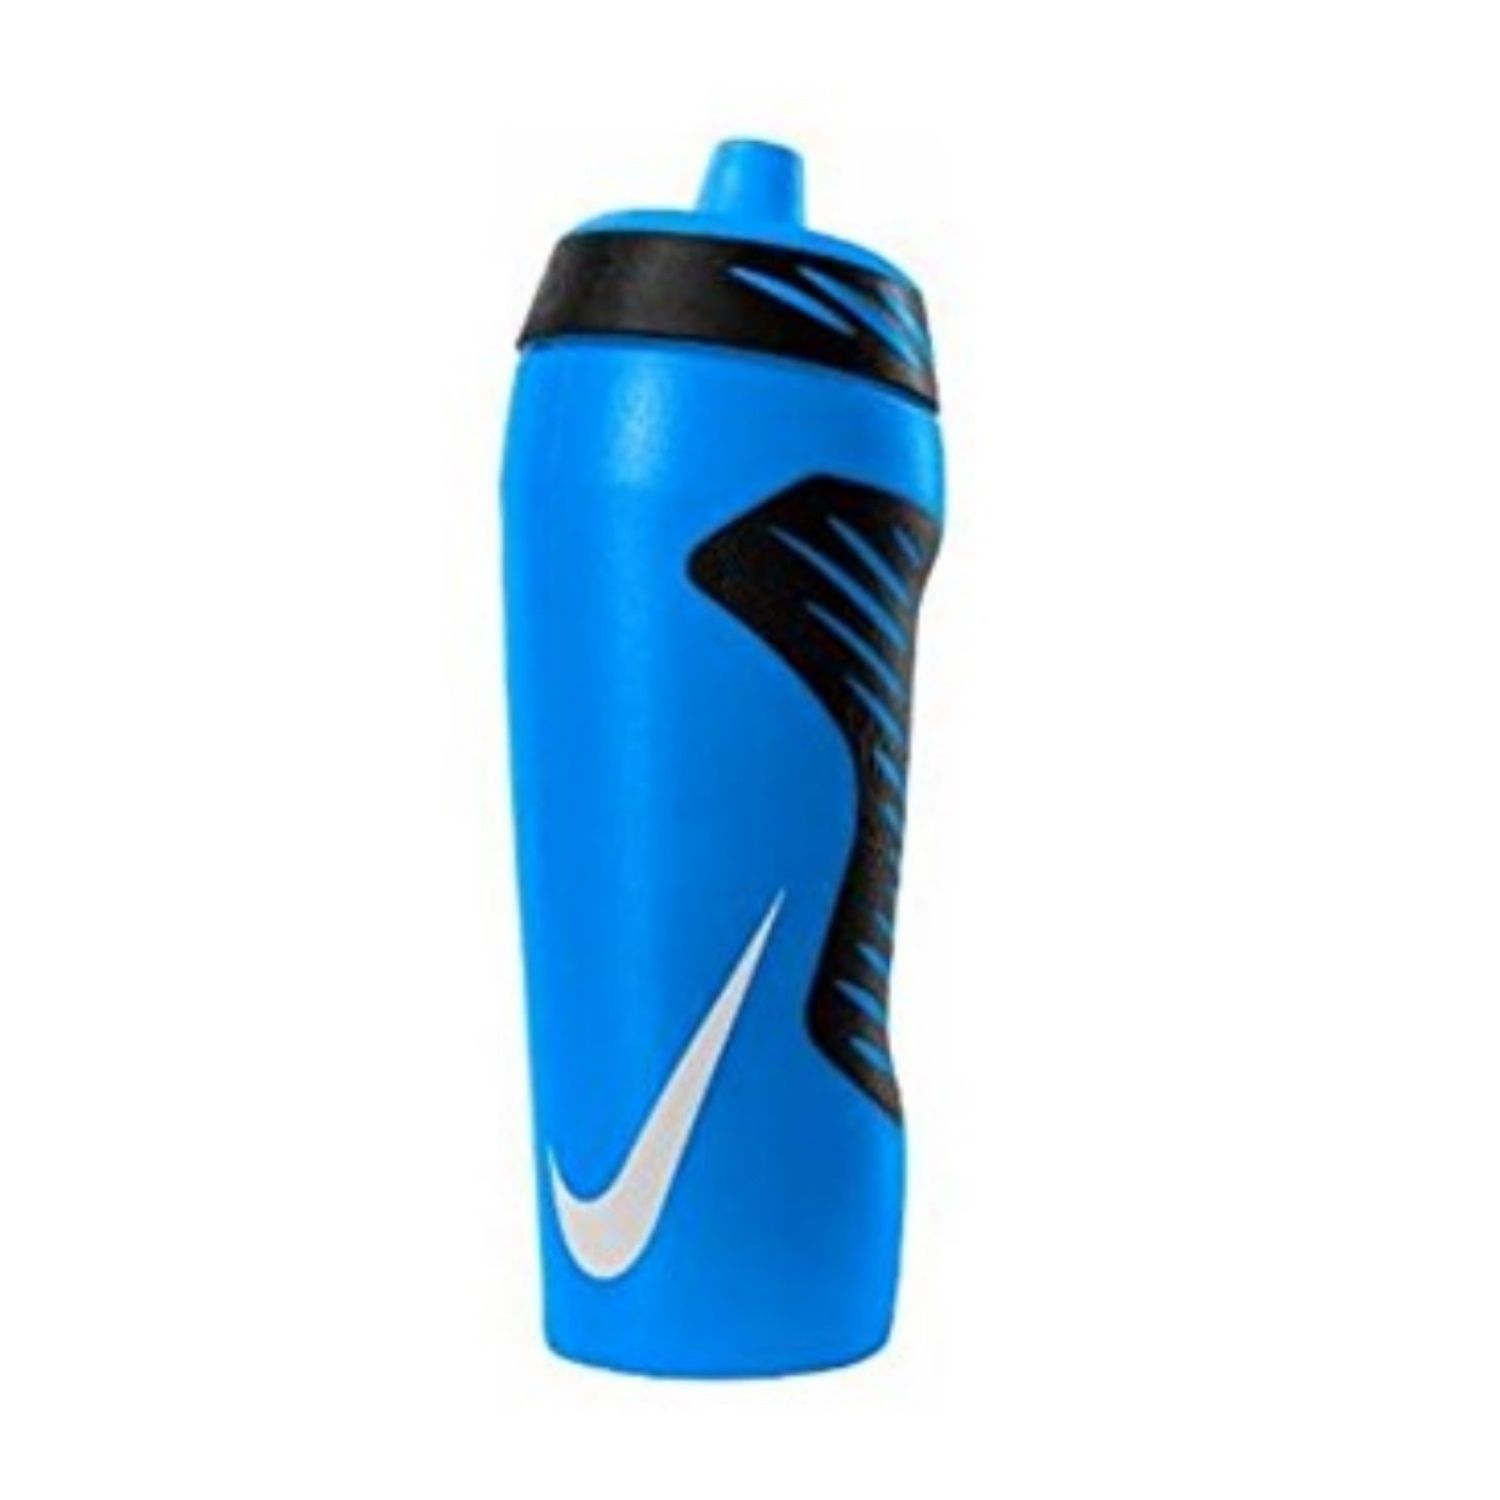 buy \u003e nike sipper price, Up to 67% OFF